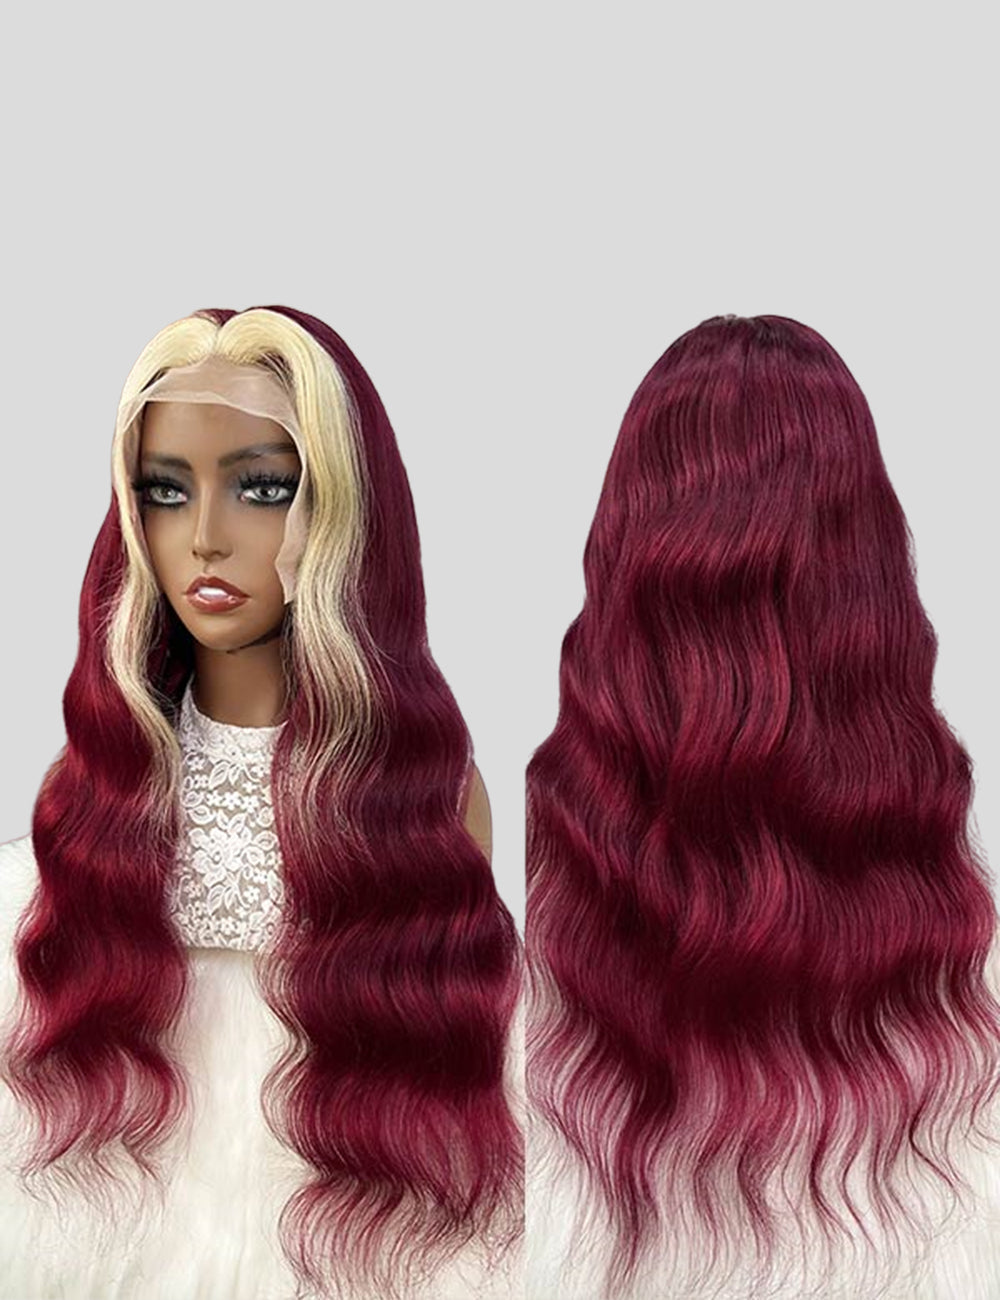 13x4 Lace Front Wigs Body Wave HD Transparent Lace Wigs 99J Burgundy with 613 Blonde Highlight Wigs